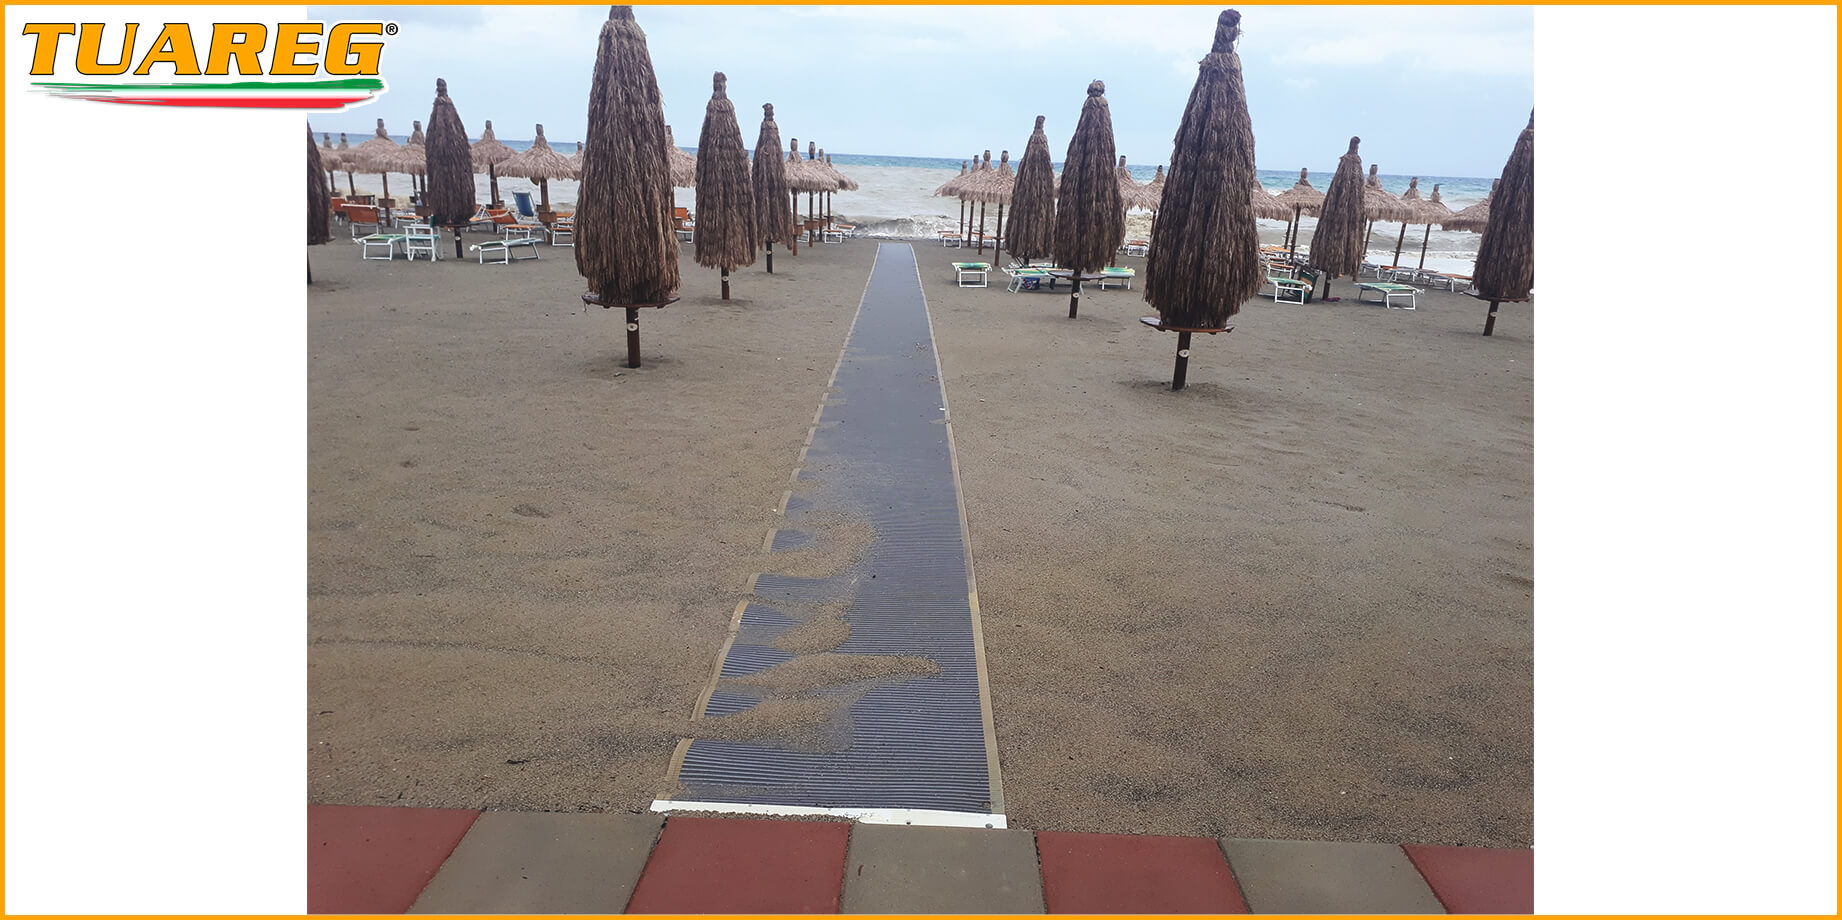 Rollable Beach Rug / Walkway - Tuareg Access - Product/Accessory for Beach Accessibility